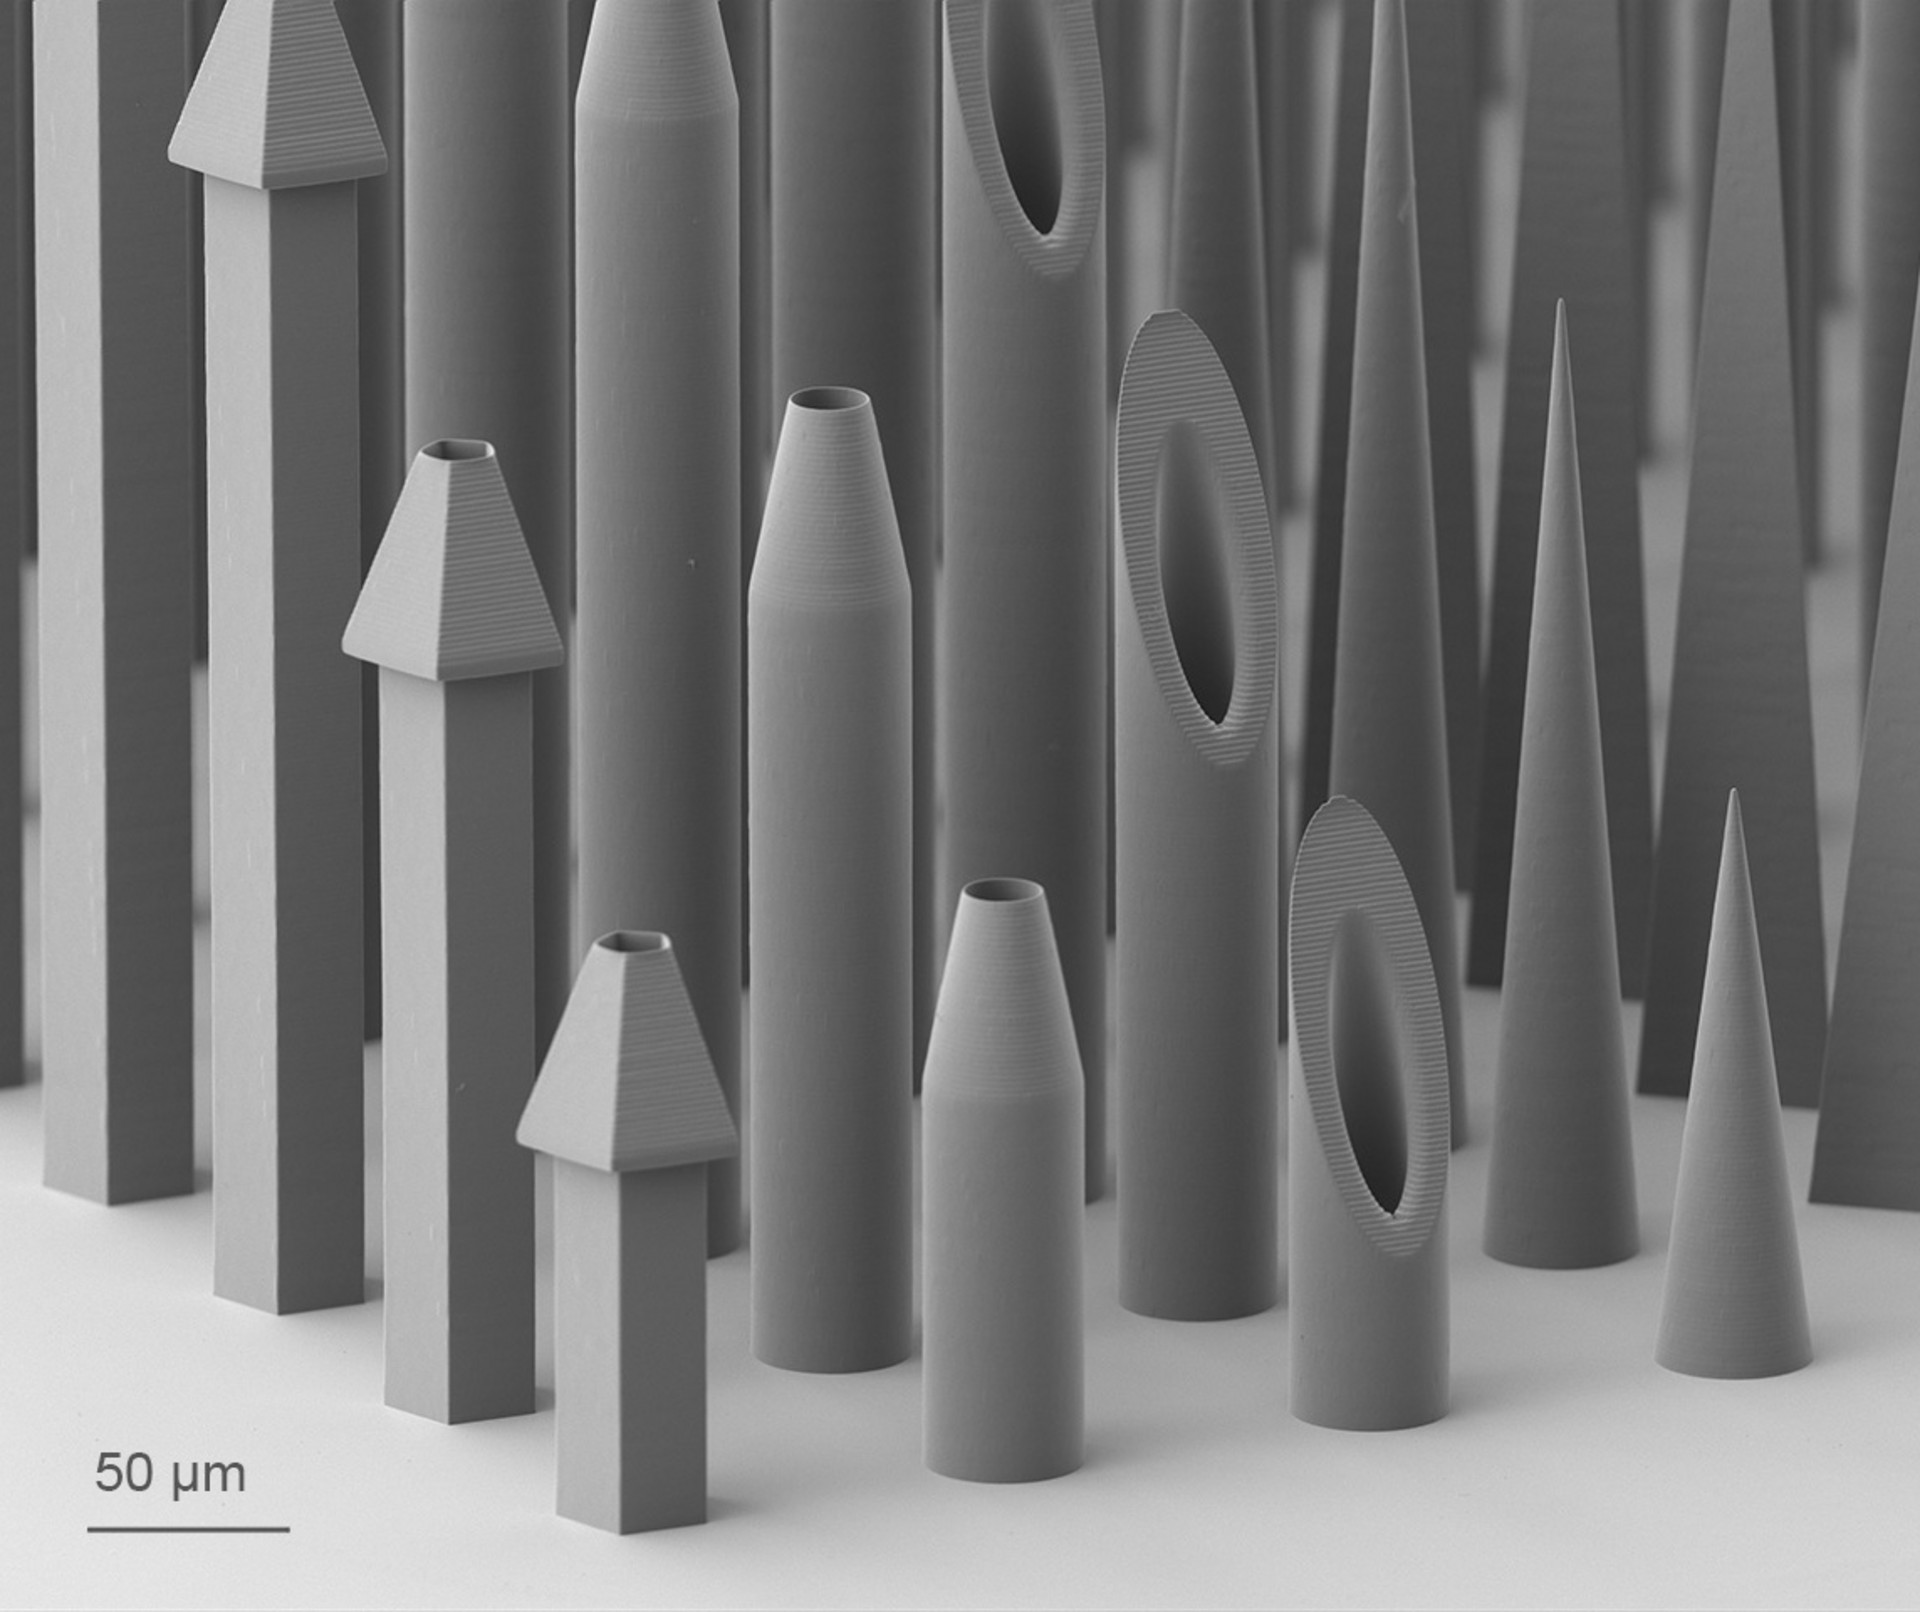 The 3D-printed microneedles in this image represent many possible biomedical applications as microfluidic devices, drug delivery vectors, microrobots, biosensors and sub-micron patterning.